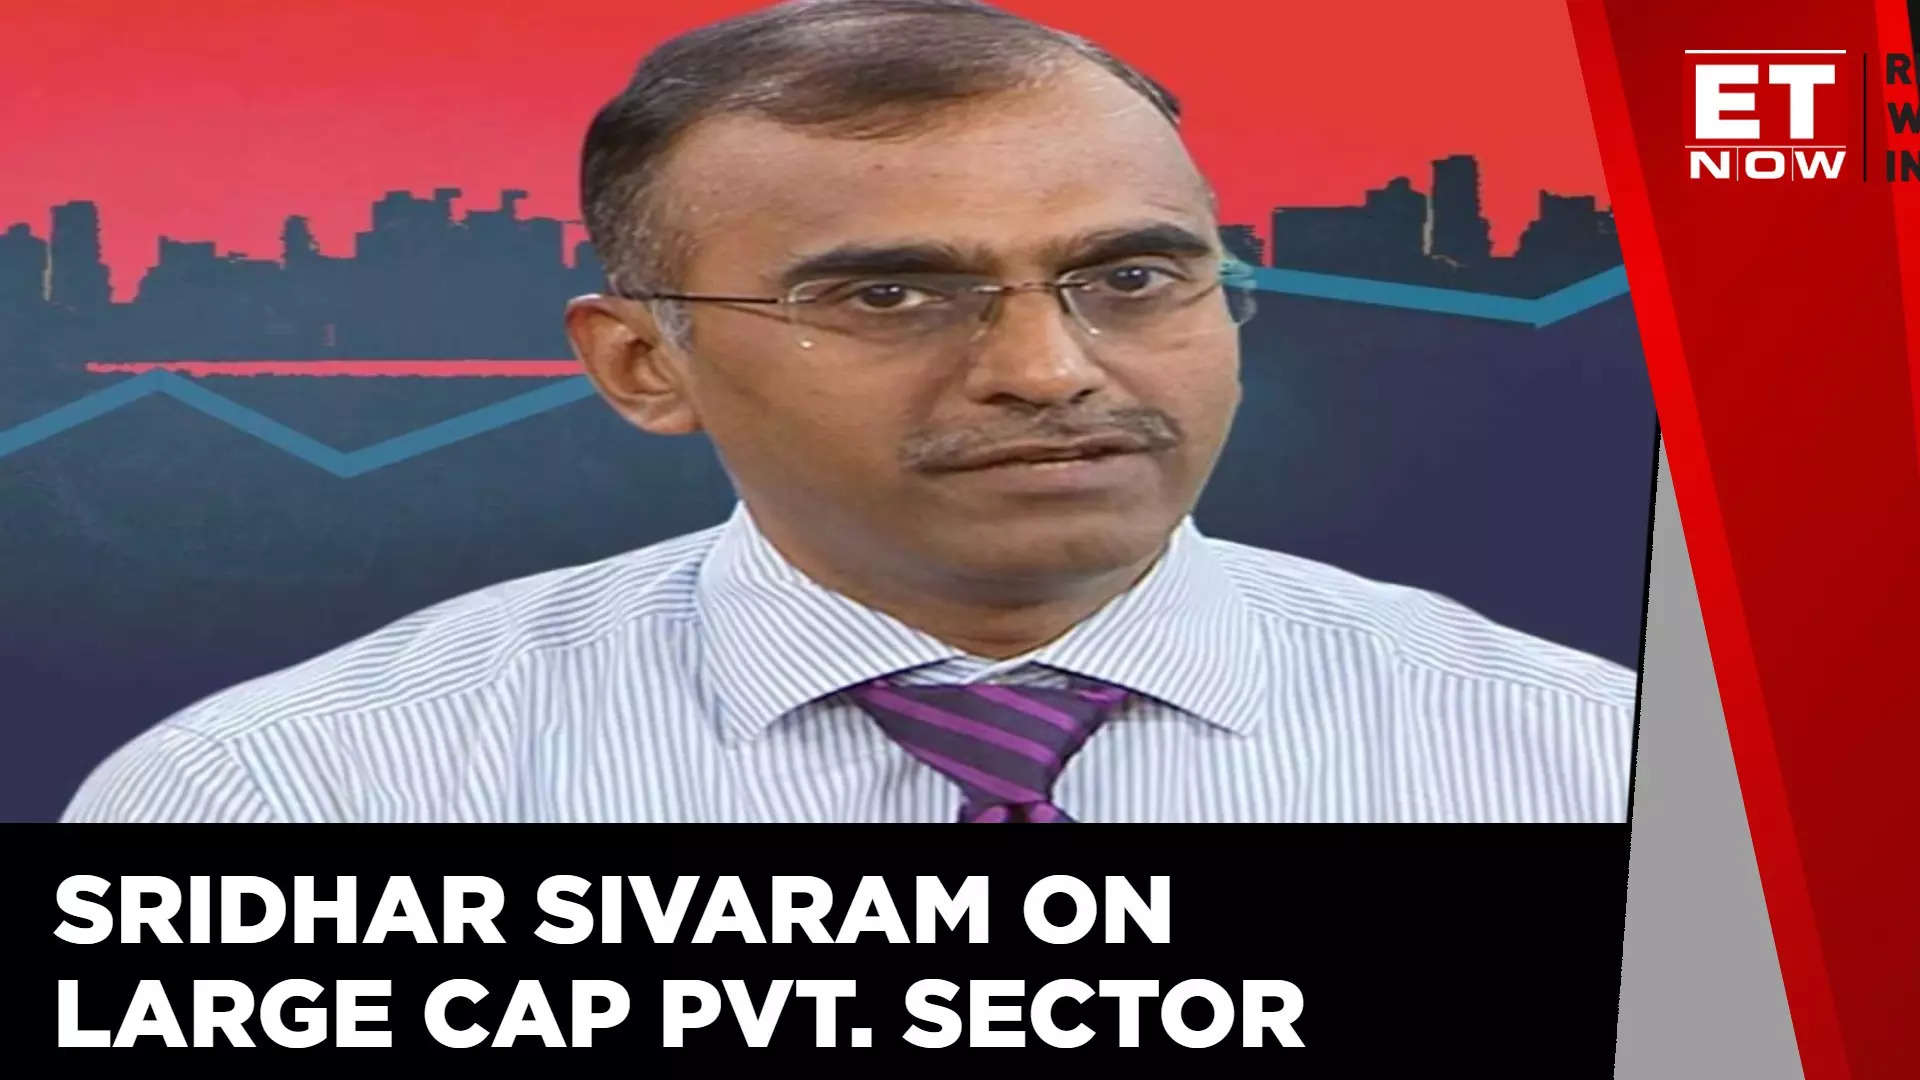 The next 3 years will be a golden phase for financials- pick your stock and stay put for 5 years Sridhar Sivaram